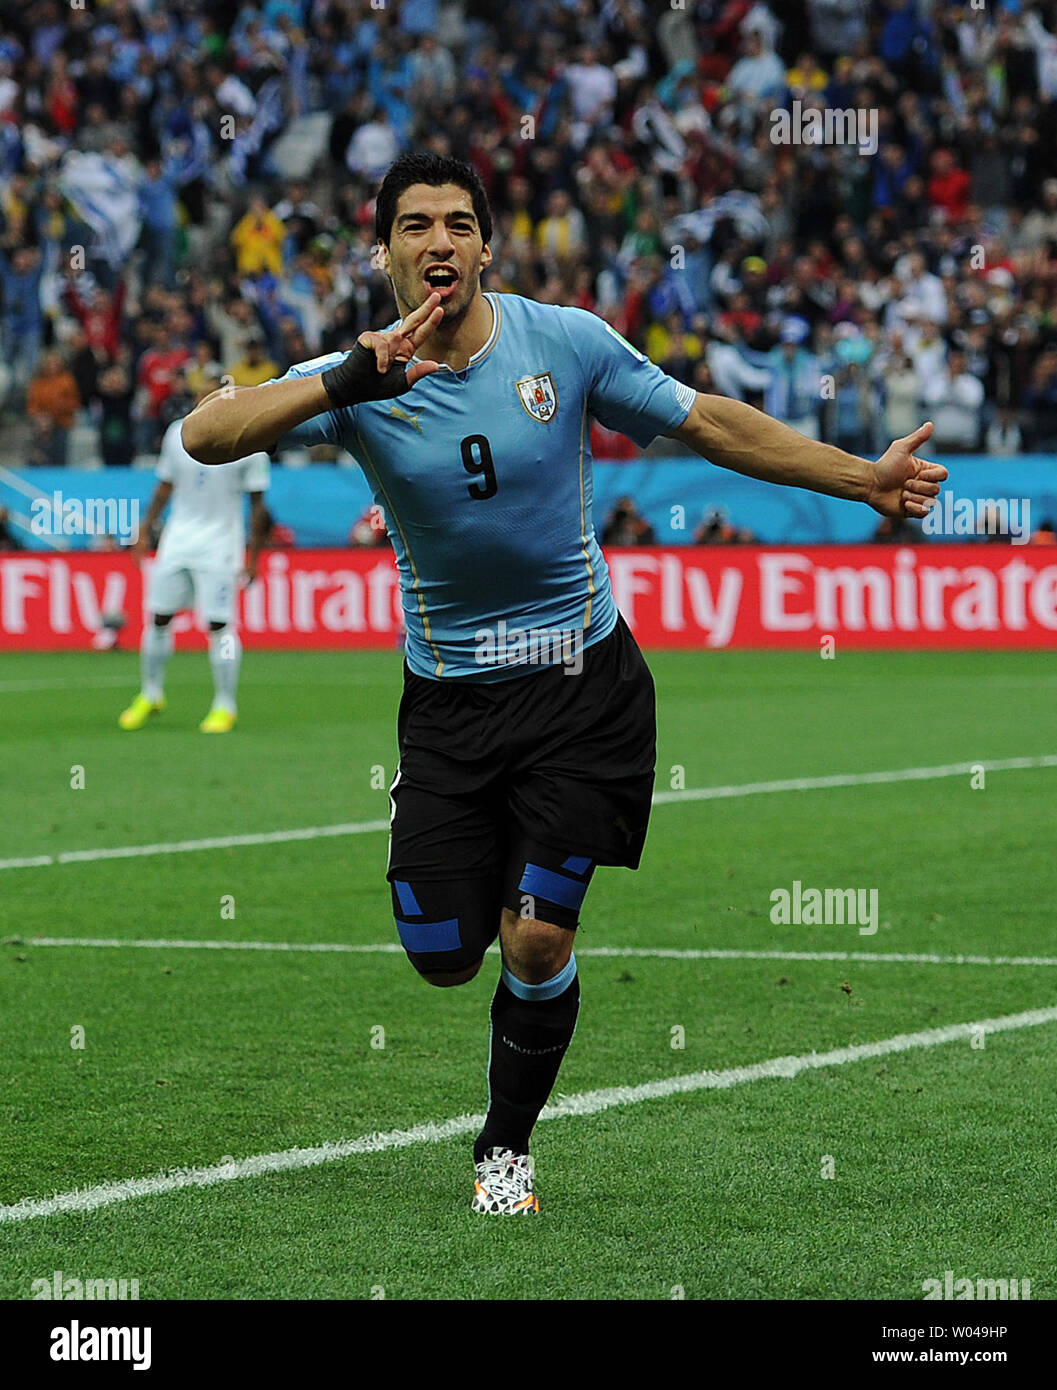 Luis Suarez of Uruguay celebrates scoring the opening goal during the 2014 FIFA World Cup Group D match at the Arena Corinthians in Sao Paulo, Brazil on June 19, 2014. UPI/Chris Brunskill Stock Photo